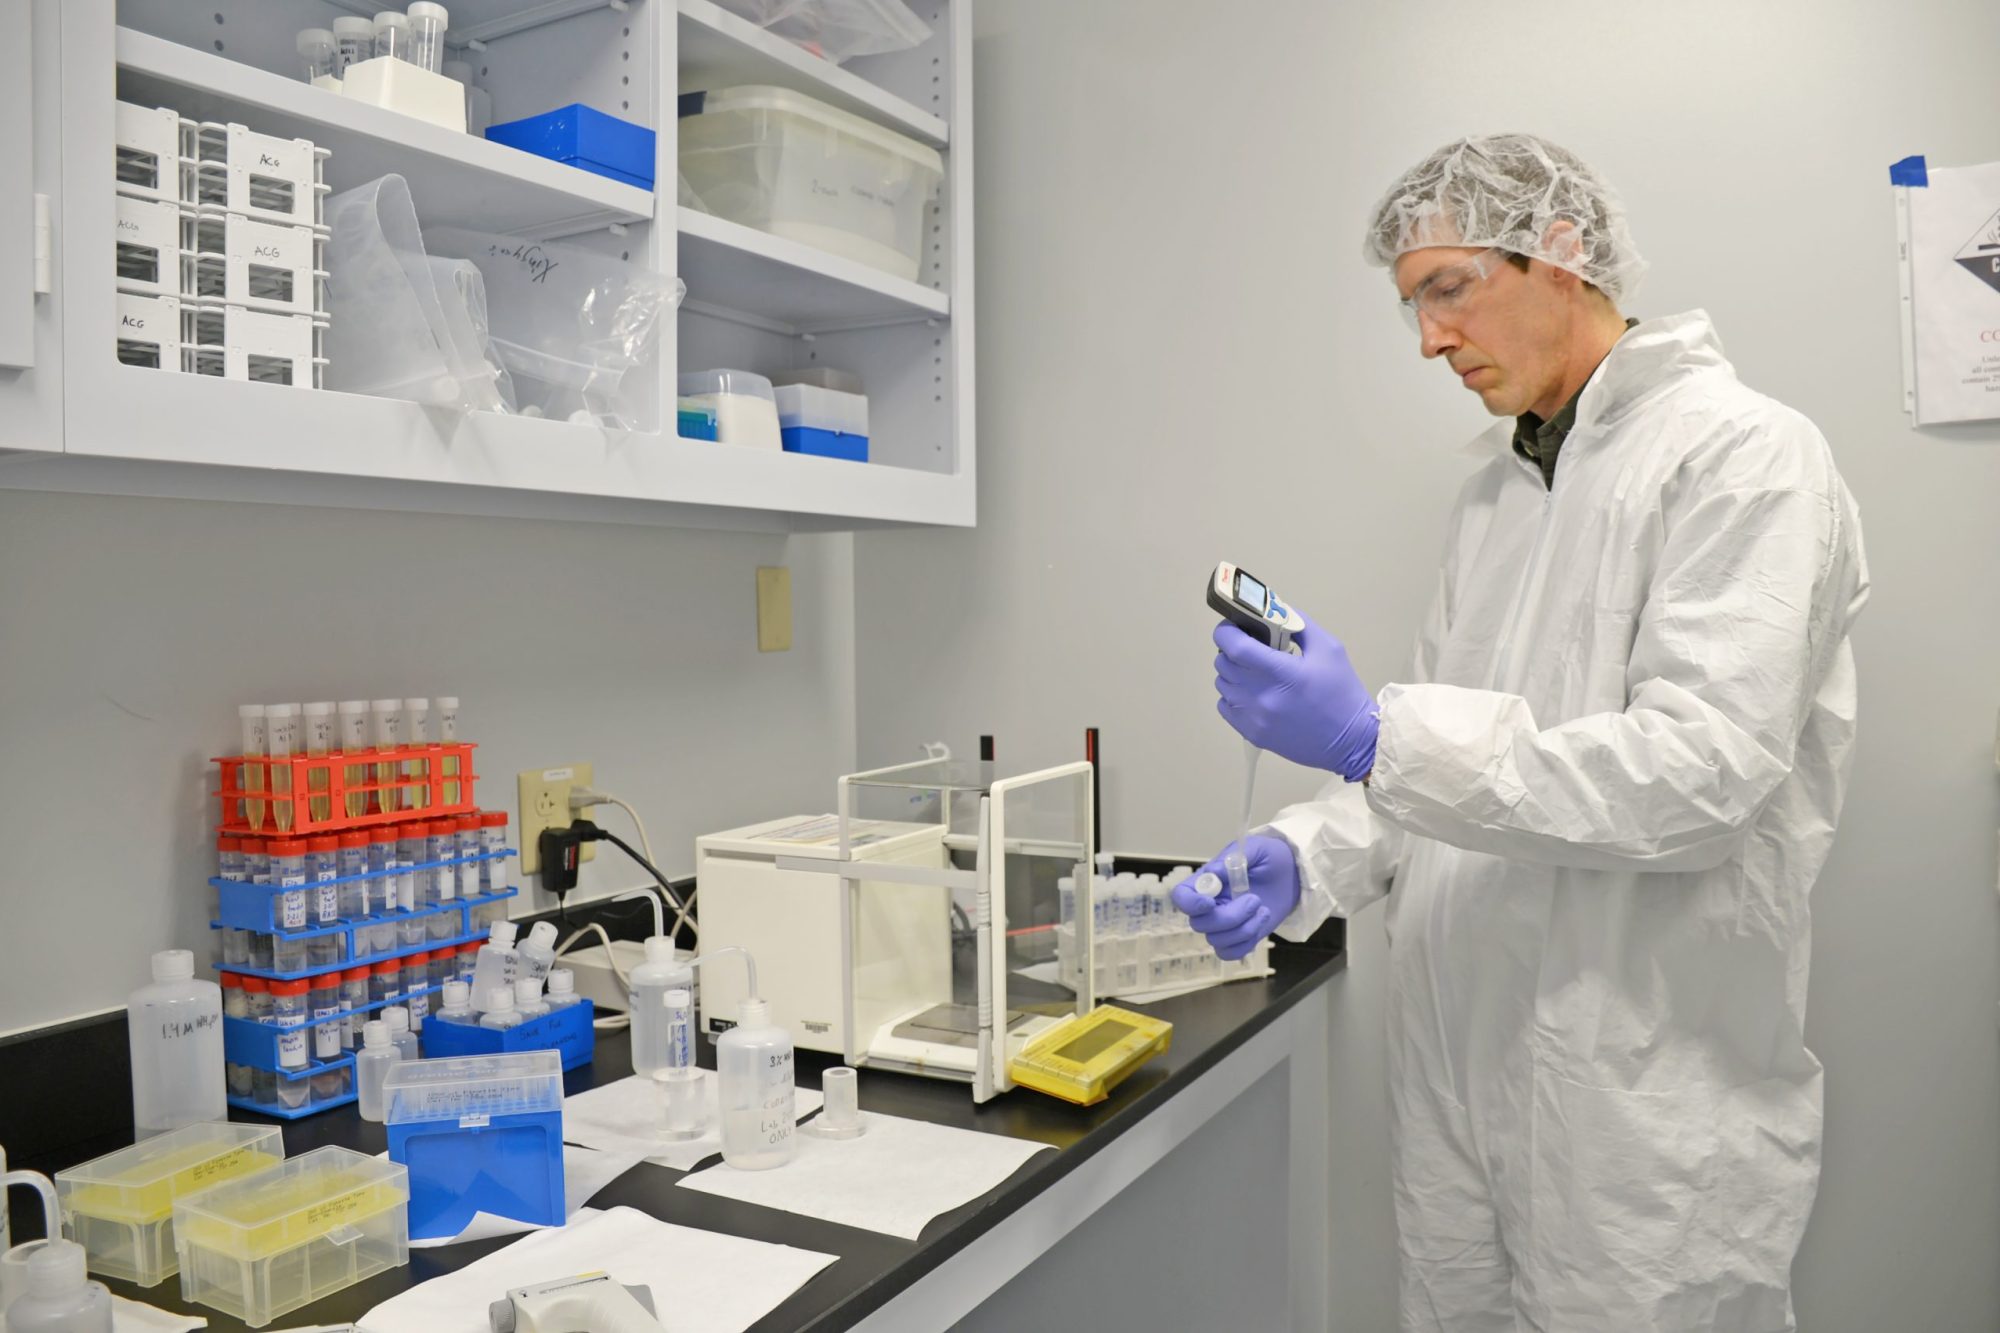 A chemist at the University of Missouri Research Reactor (MURR) prepares samples for analysis.